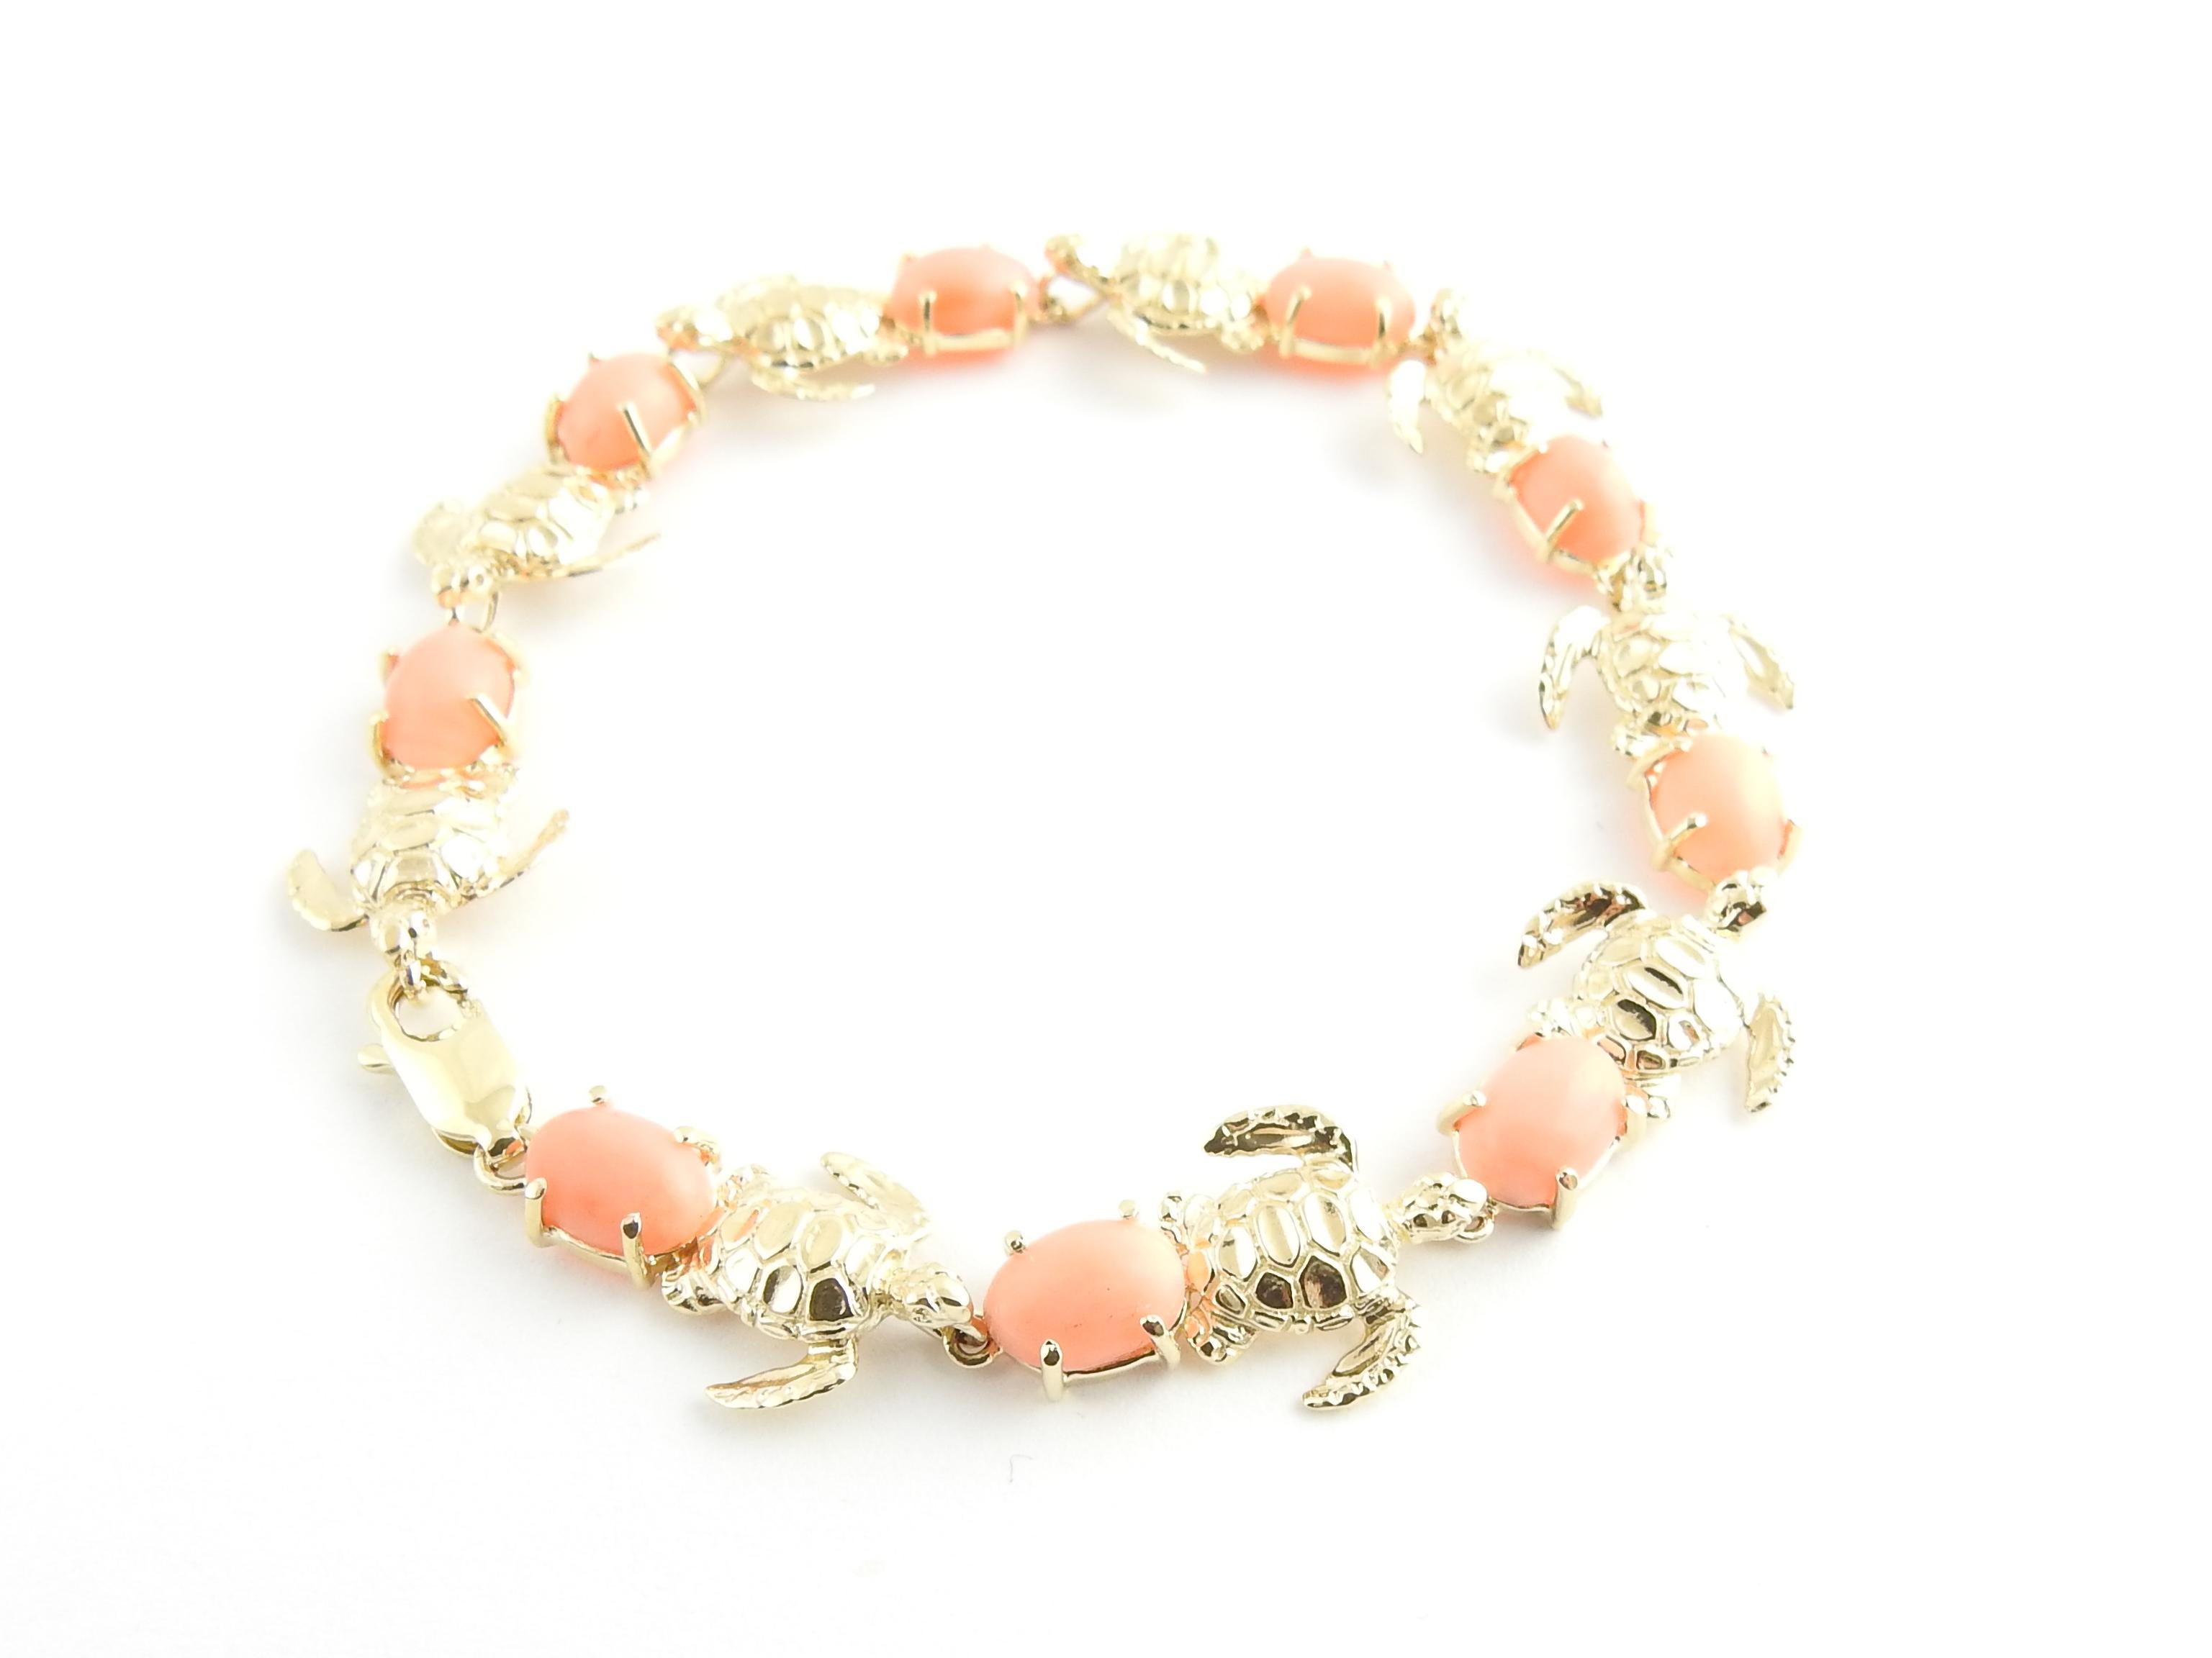 Vintage 14 Karat Yellow Gold and Coral Sea Turtle Bracelet

This lovely sea turtle bracelet is accented with nine oval coral stones (8 mm x 6 mm) crafted in 14K yellow gold.

Size: 6.75 inches

Weight: 6.6 dwt. /10.3 gr.

Stamped: 585

Very good